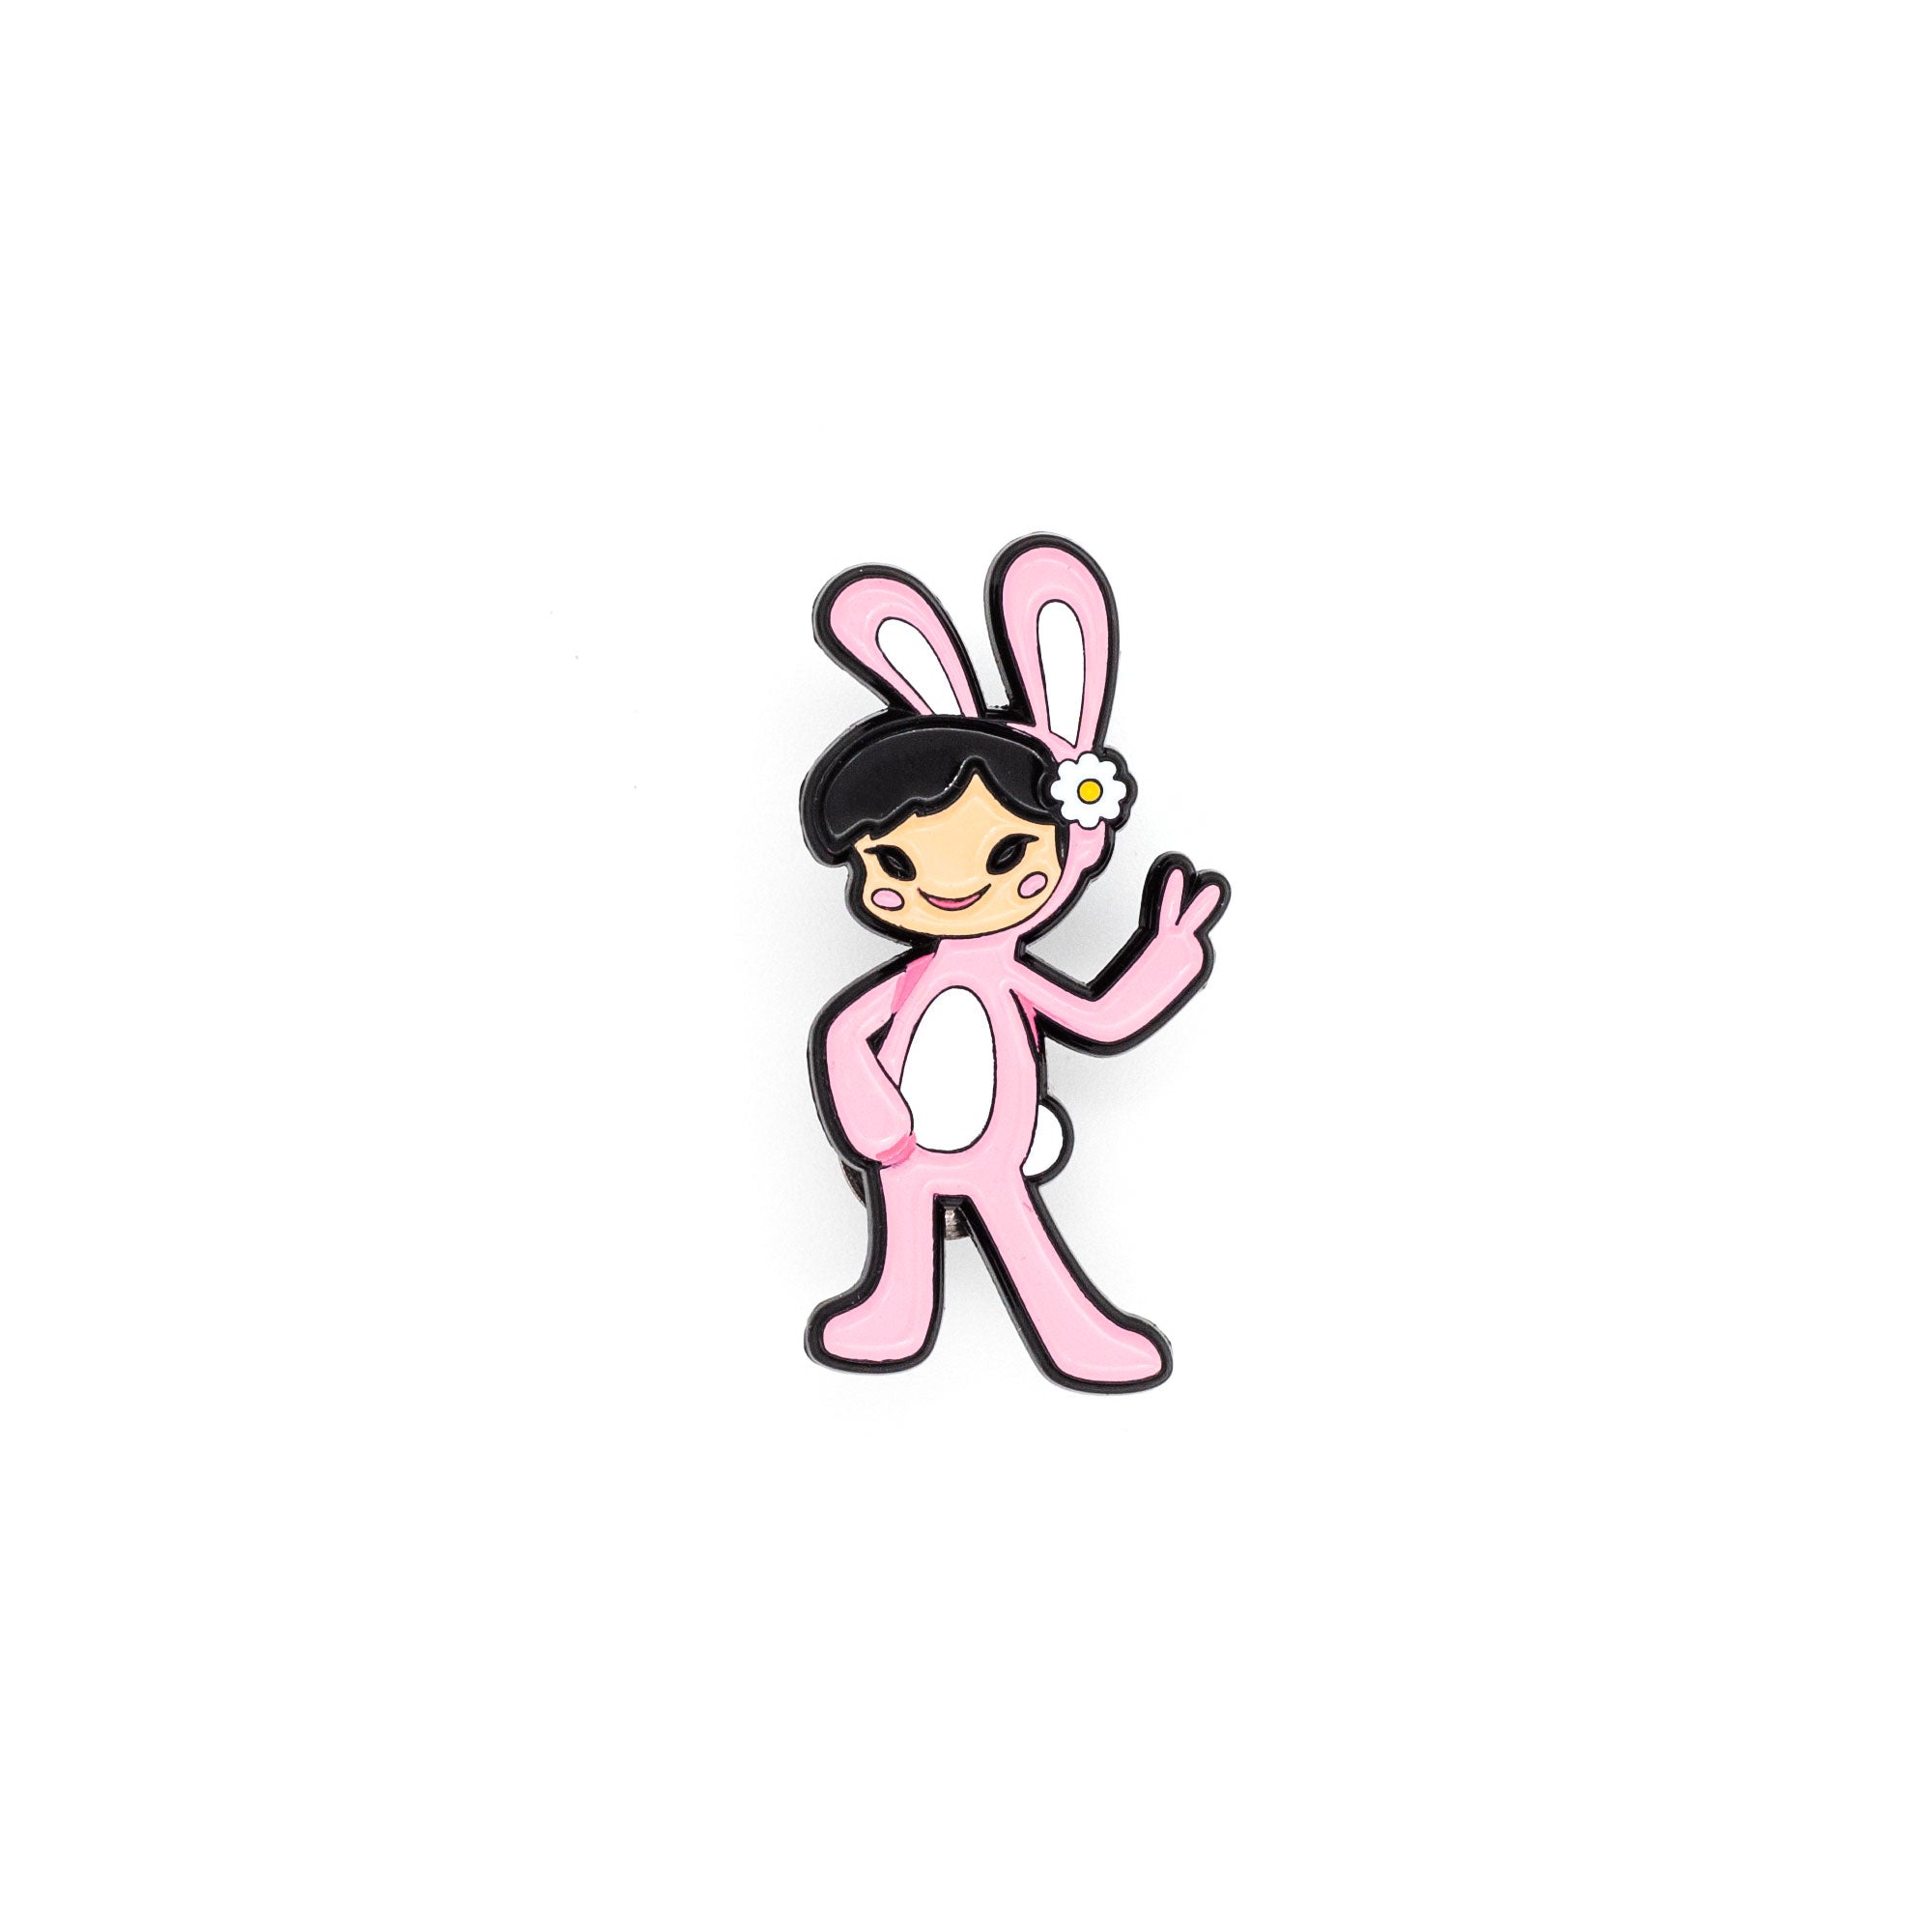 paul frank bunny girl lapel pin on white background. bunny girl is in a pink bunny suit with a white and yellow flower in her hair.